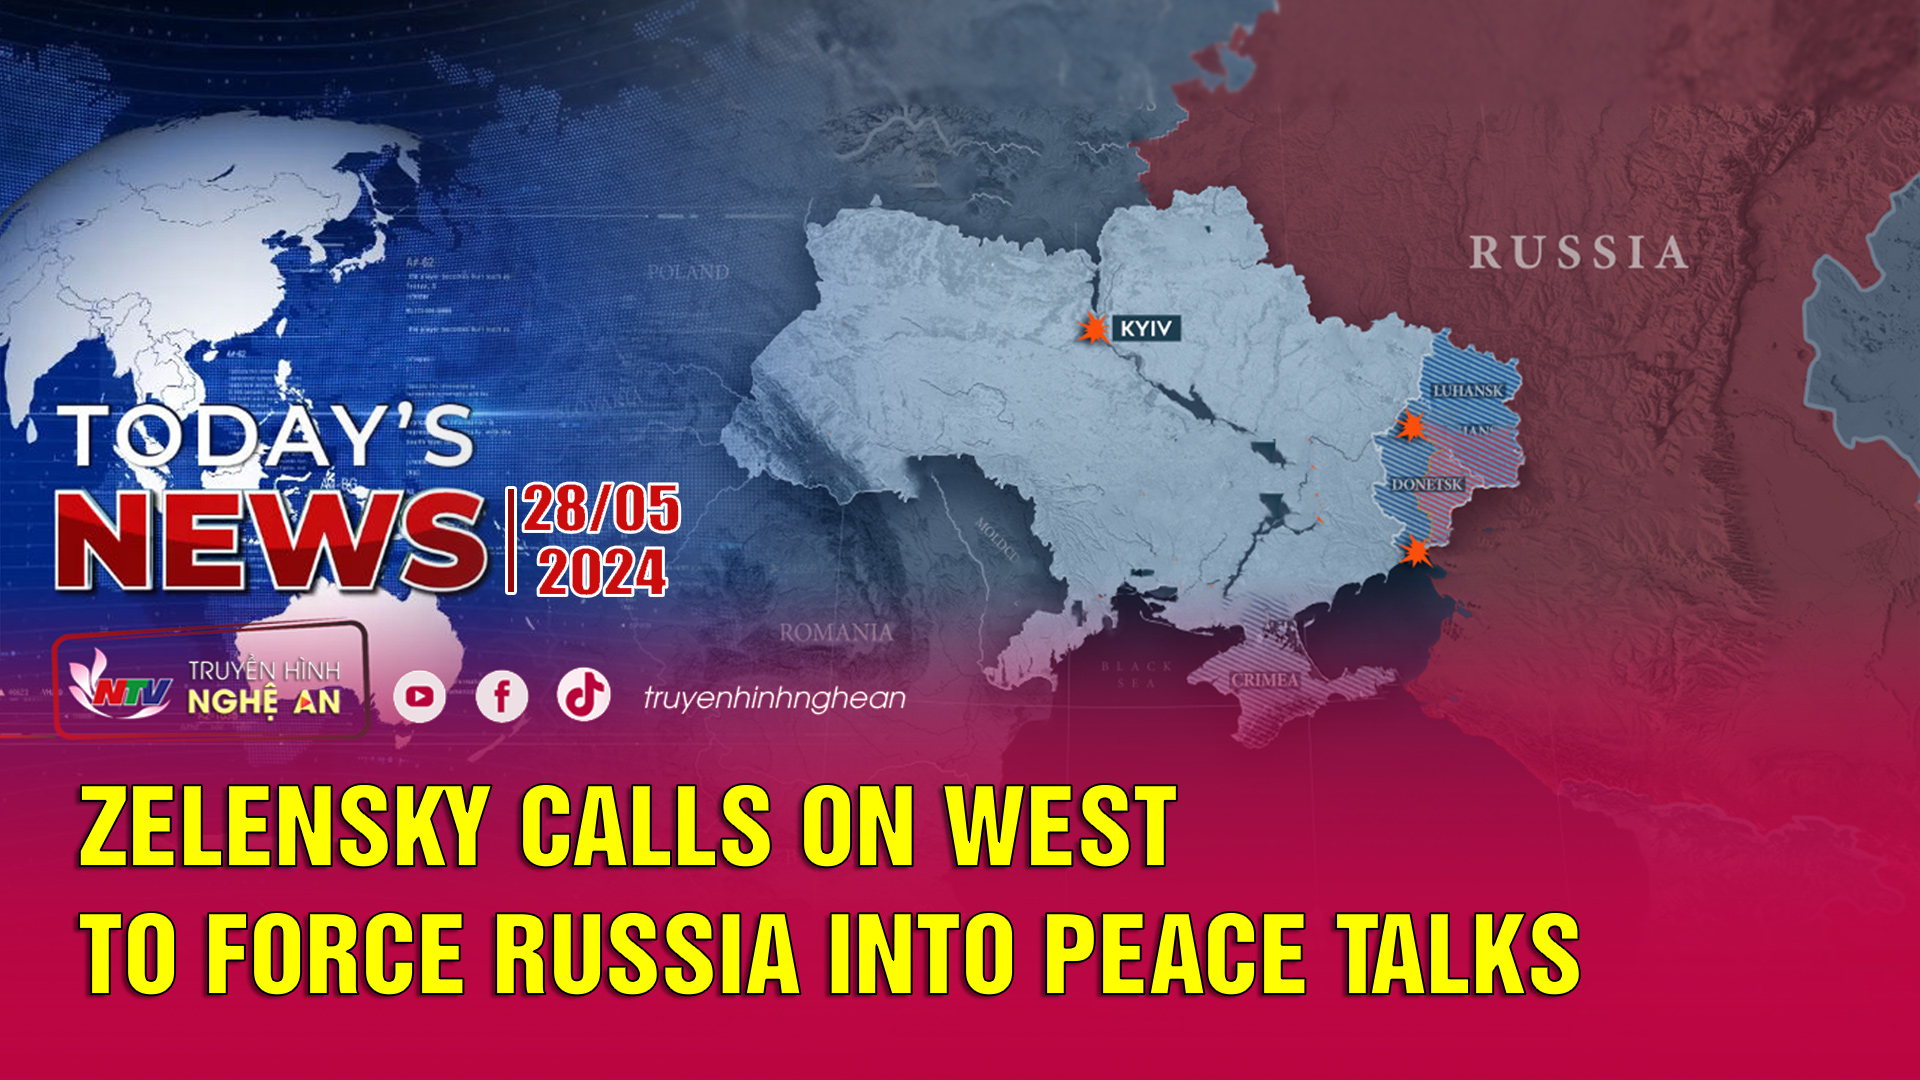 Today's News 28/05/2024: Zelensky calls on West to force Russia into peace talks